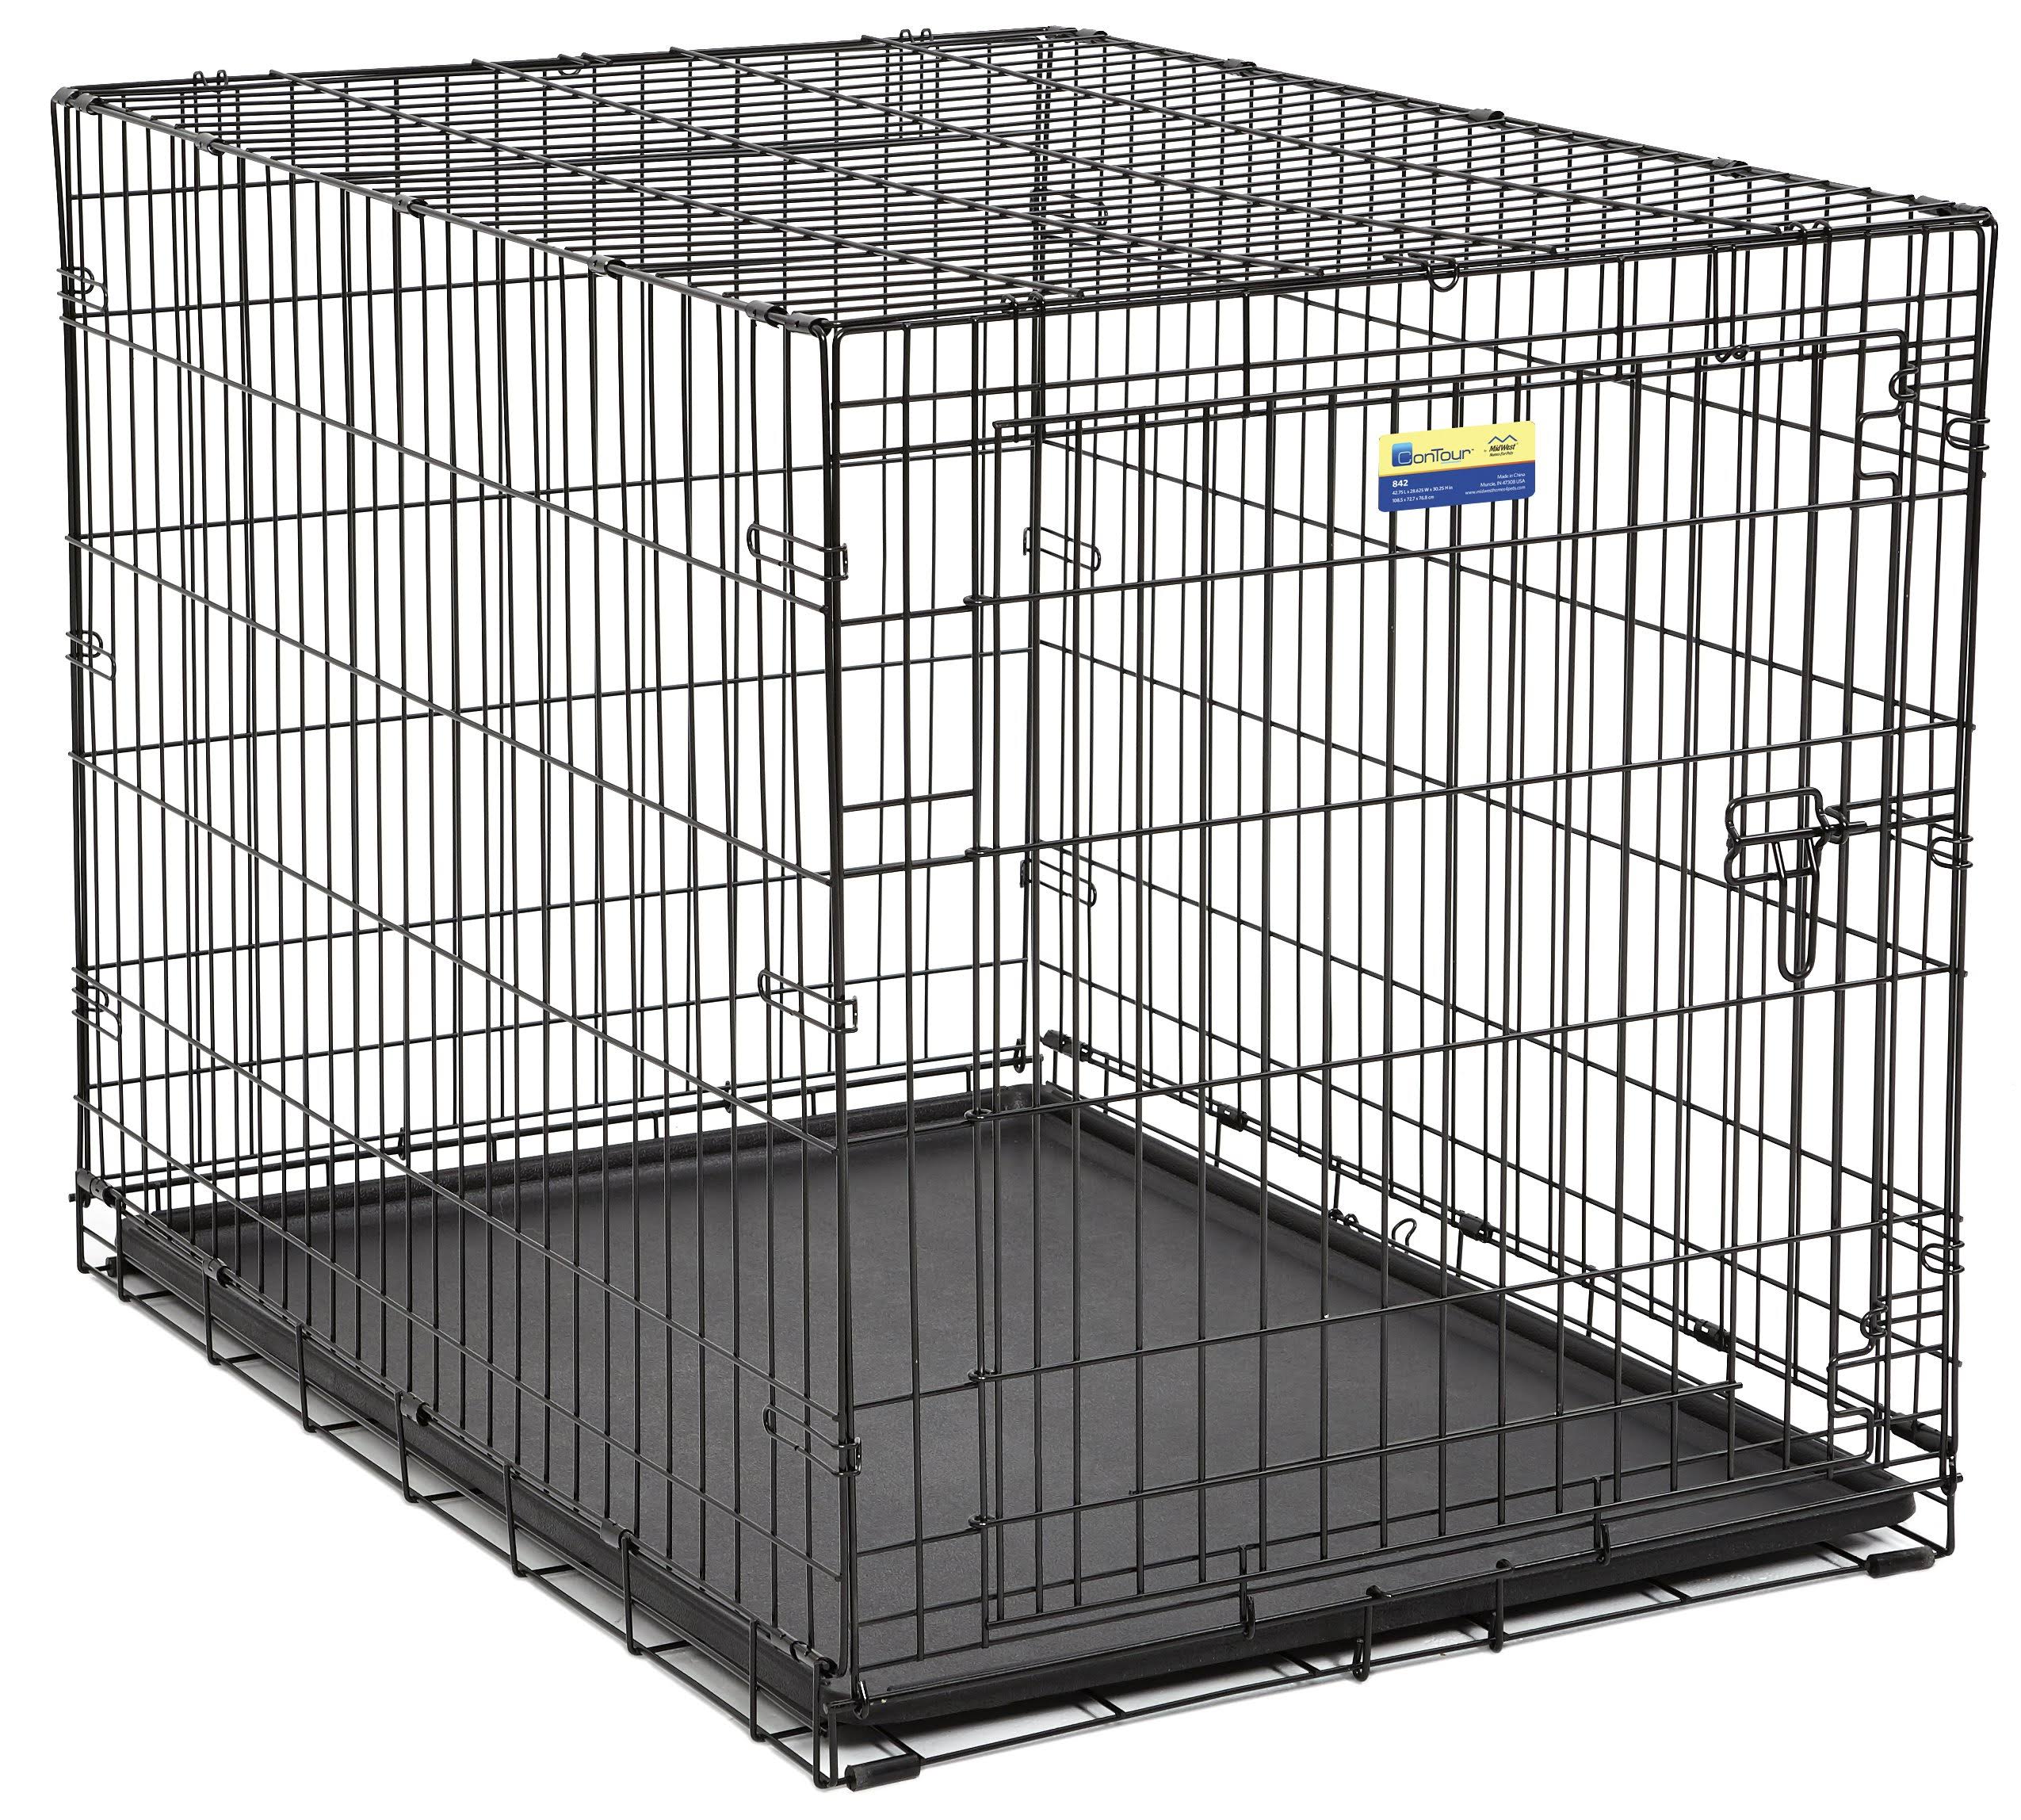 Midwest Metal Products Contour Dog Crate - 42 x 28 x 30